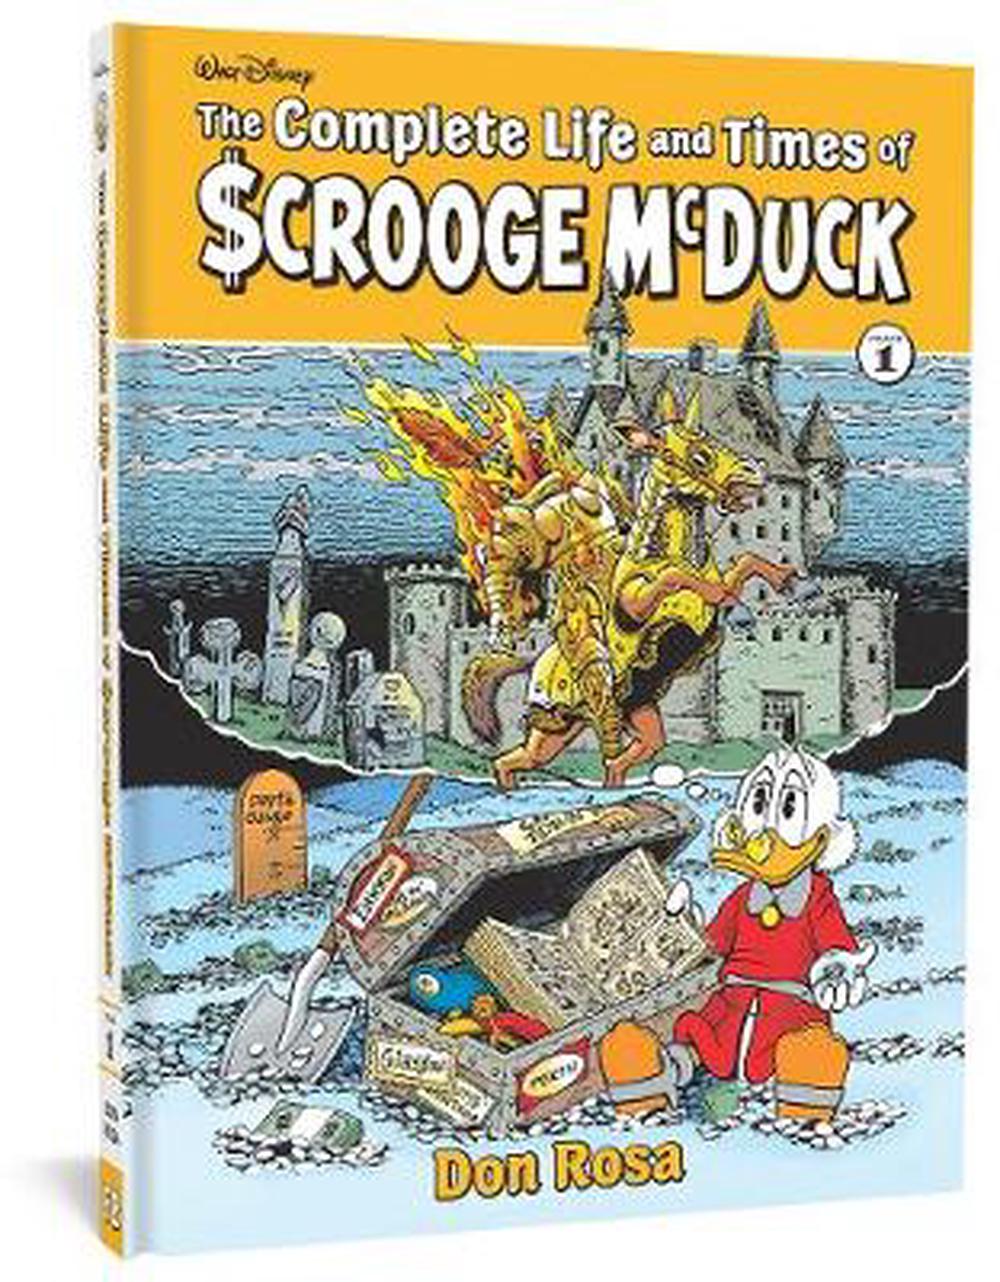 The Complete Life And Times Of Scrooge Mcduck Volume 1 By Don Rosa 